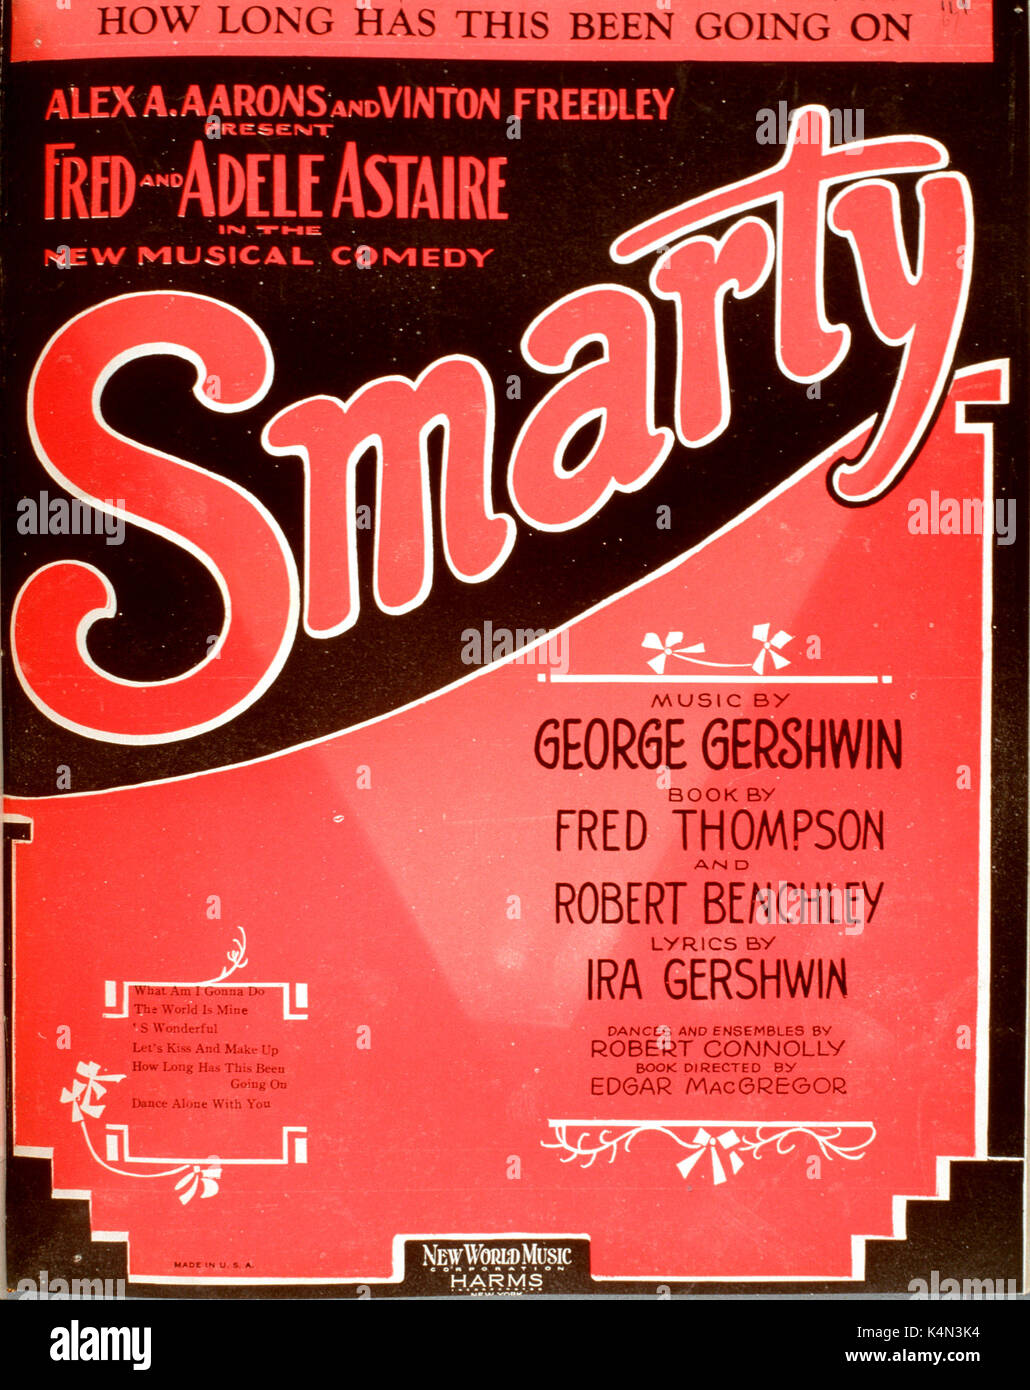 George Gershwin's 'Smarty' score cover. Music by George Gershwin; Lyrics by Ira Gershwin; from book by Fred Thompson and Robert Benchley, with Fred and Adele Astaire. Stock Photo